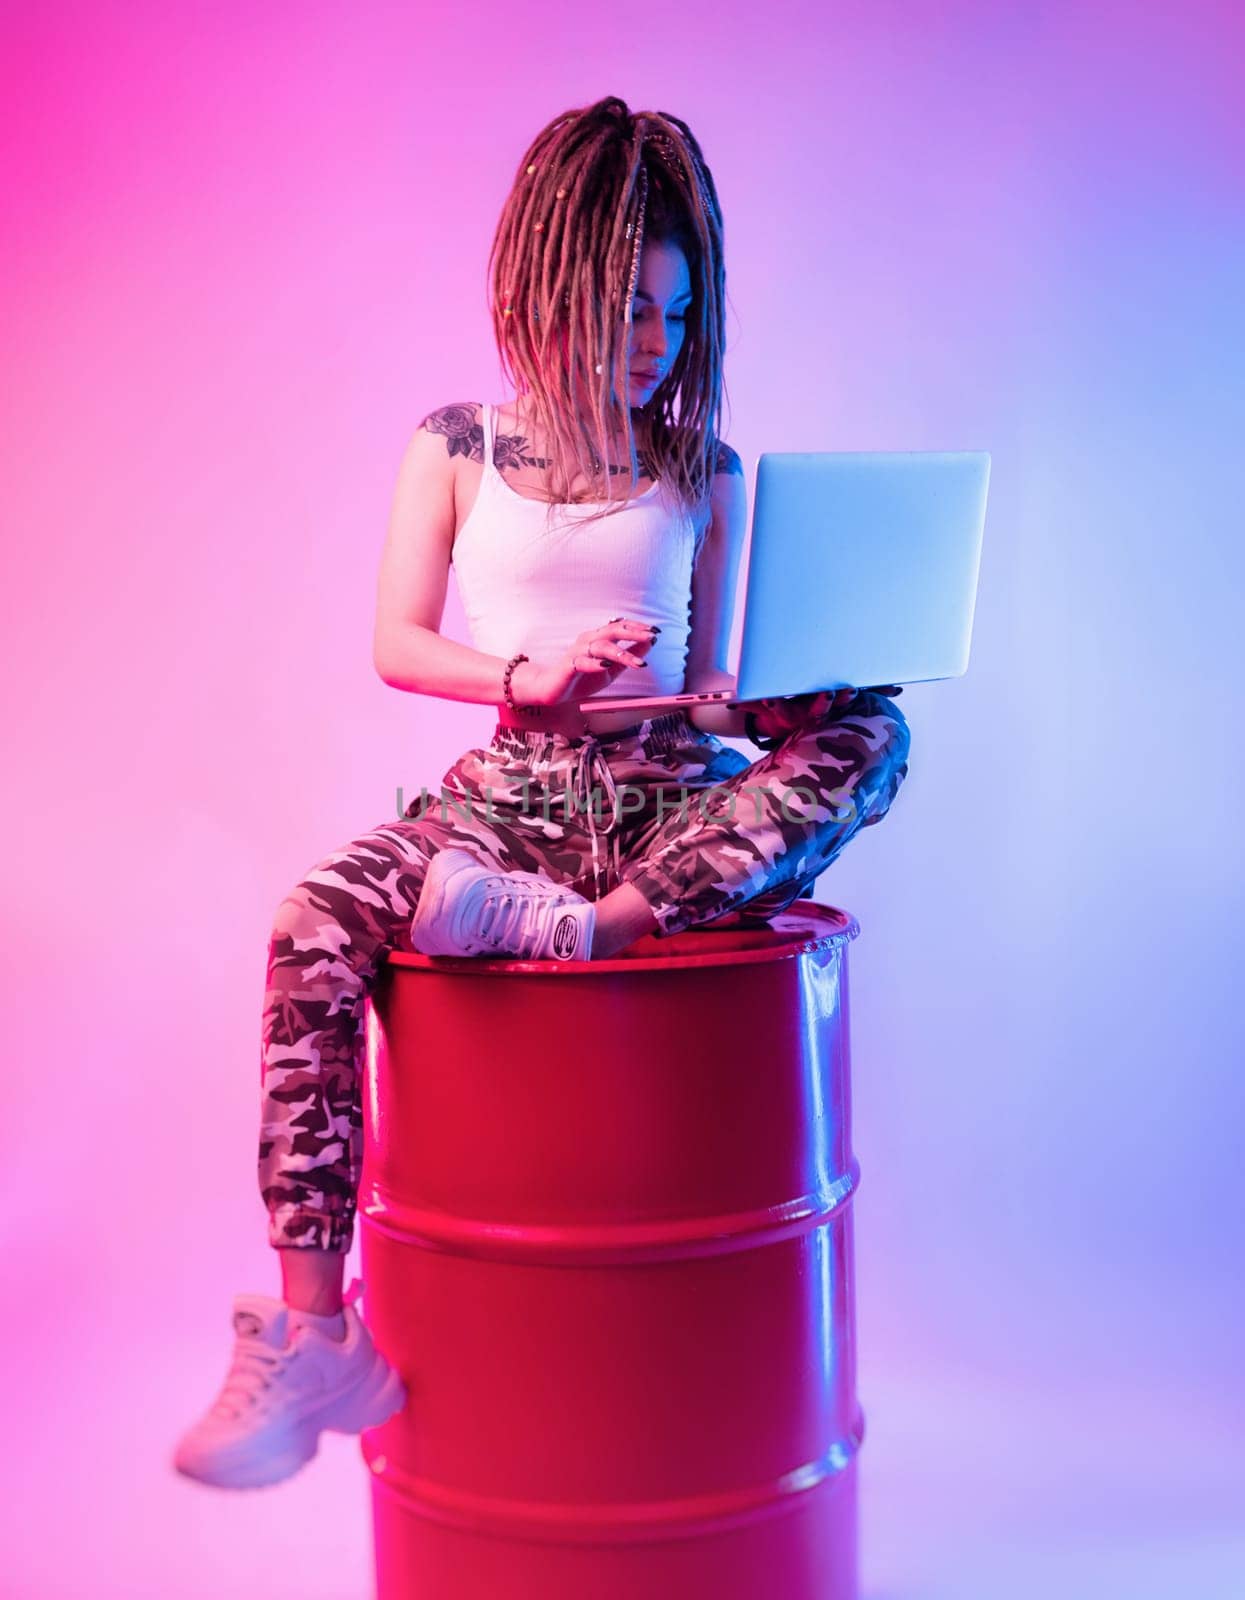 sexy girl with braids dreadlocks on her head in neon light with a laptop on a light background copy paste by Rotozey